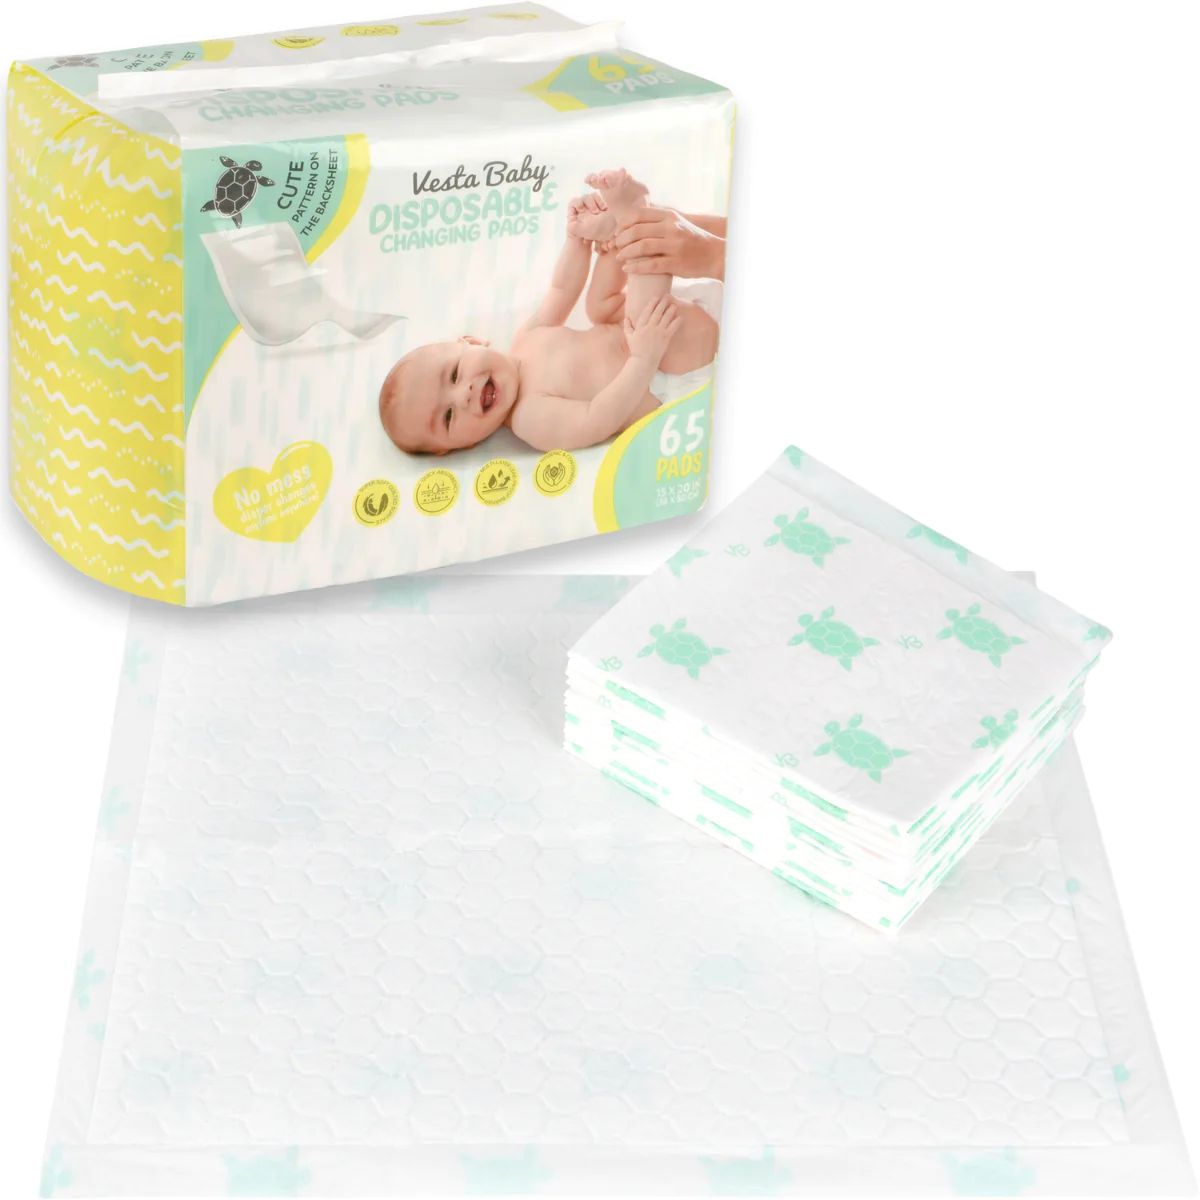 Disposable Changing Pads | Vesta Baby